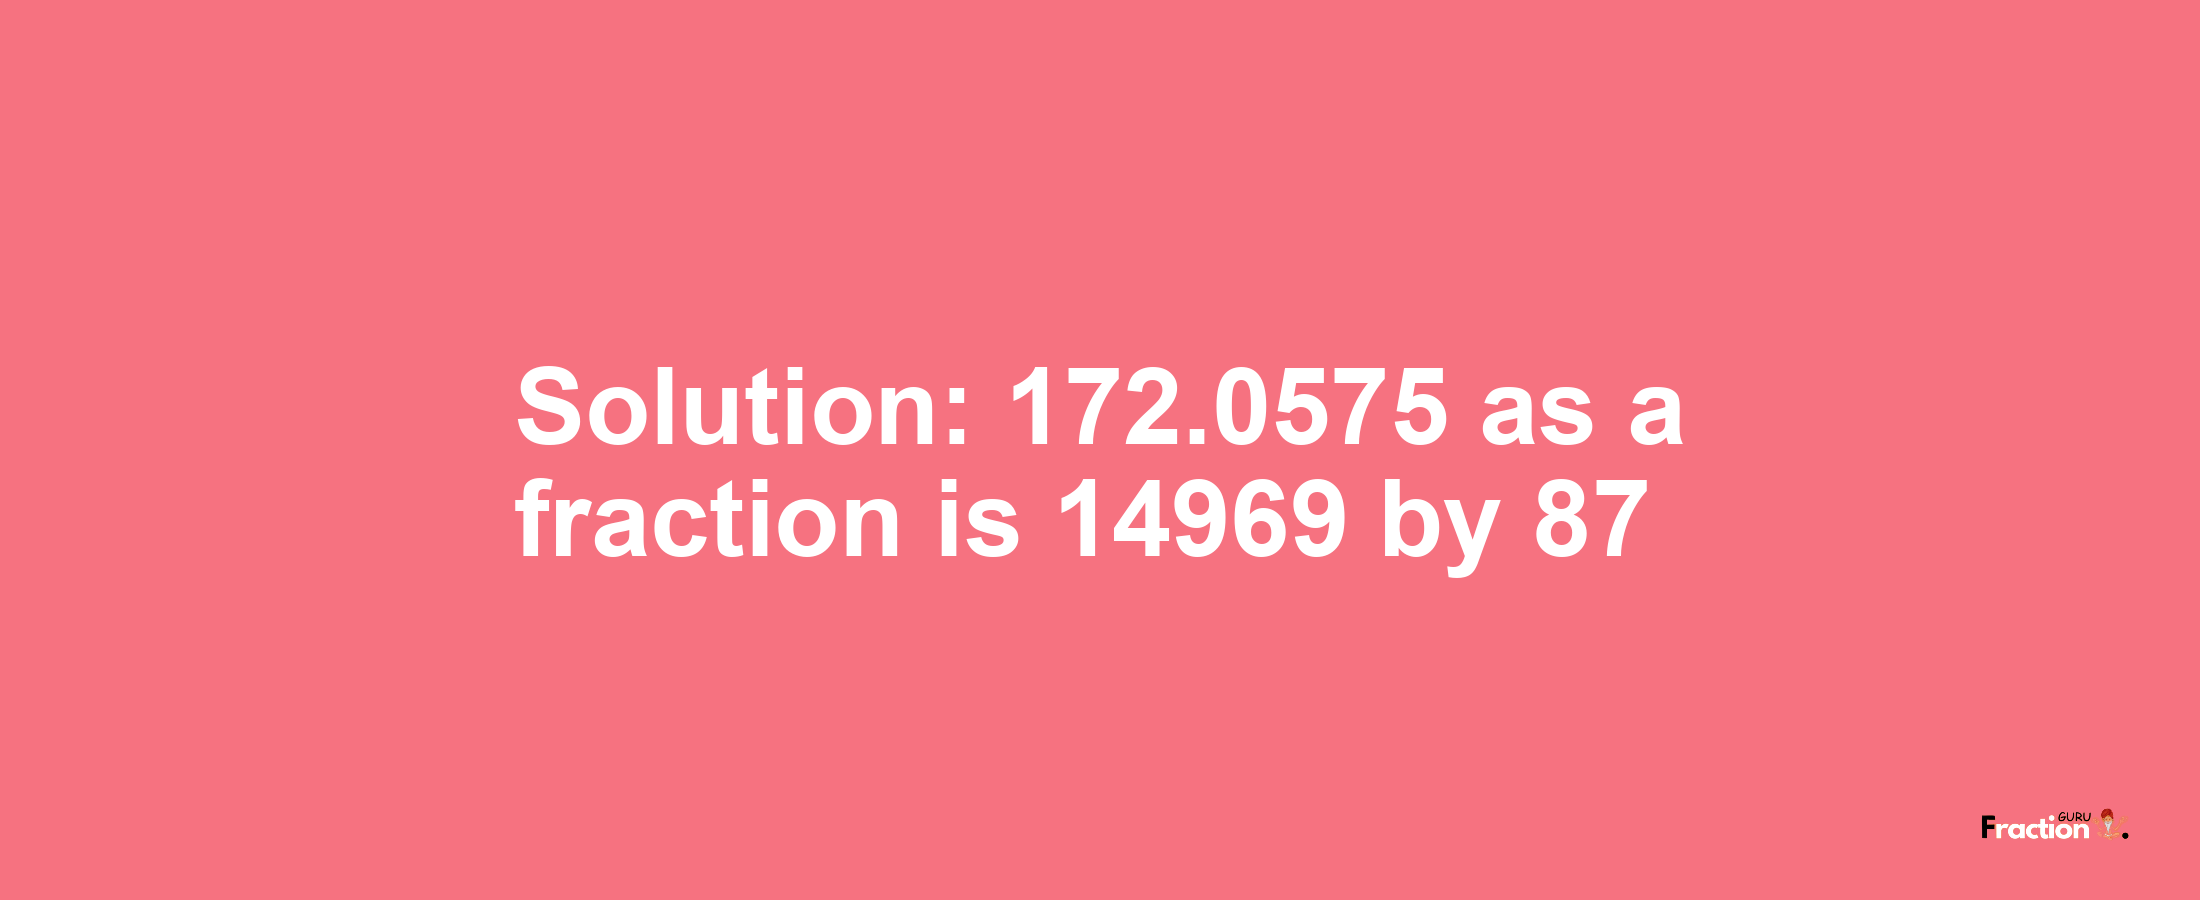 Solution:172.0575 as a fraction is 14969/87